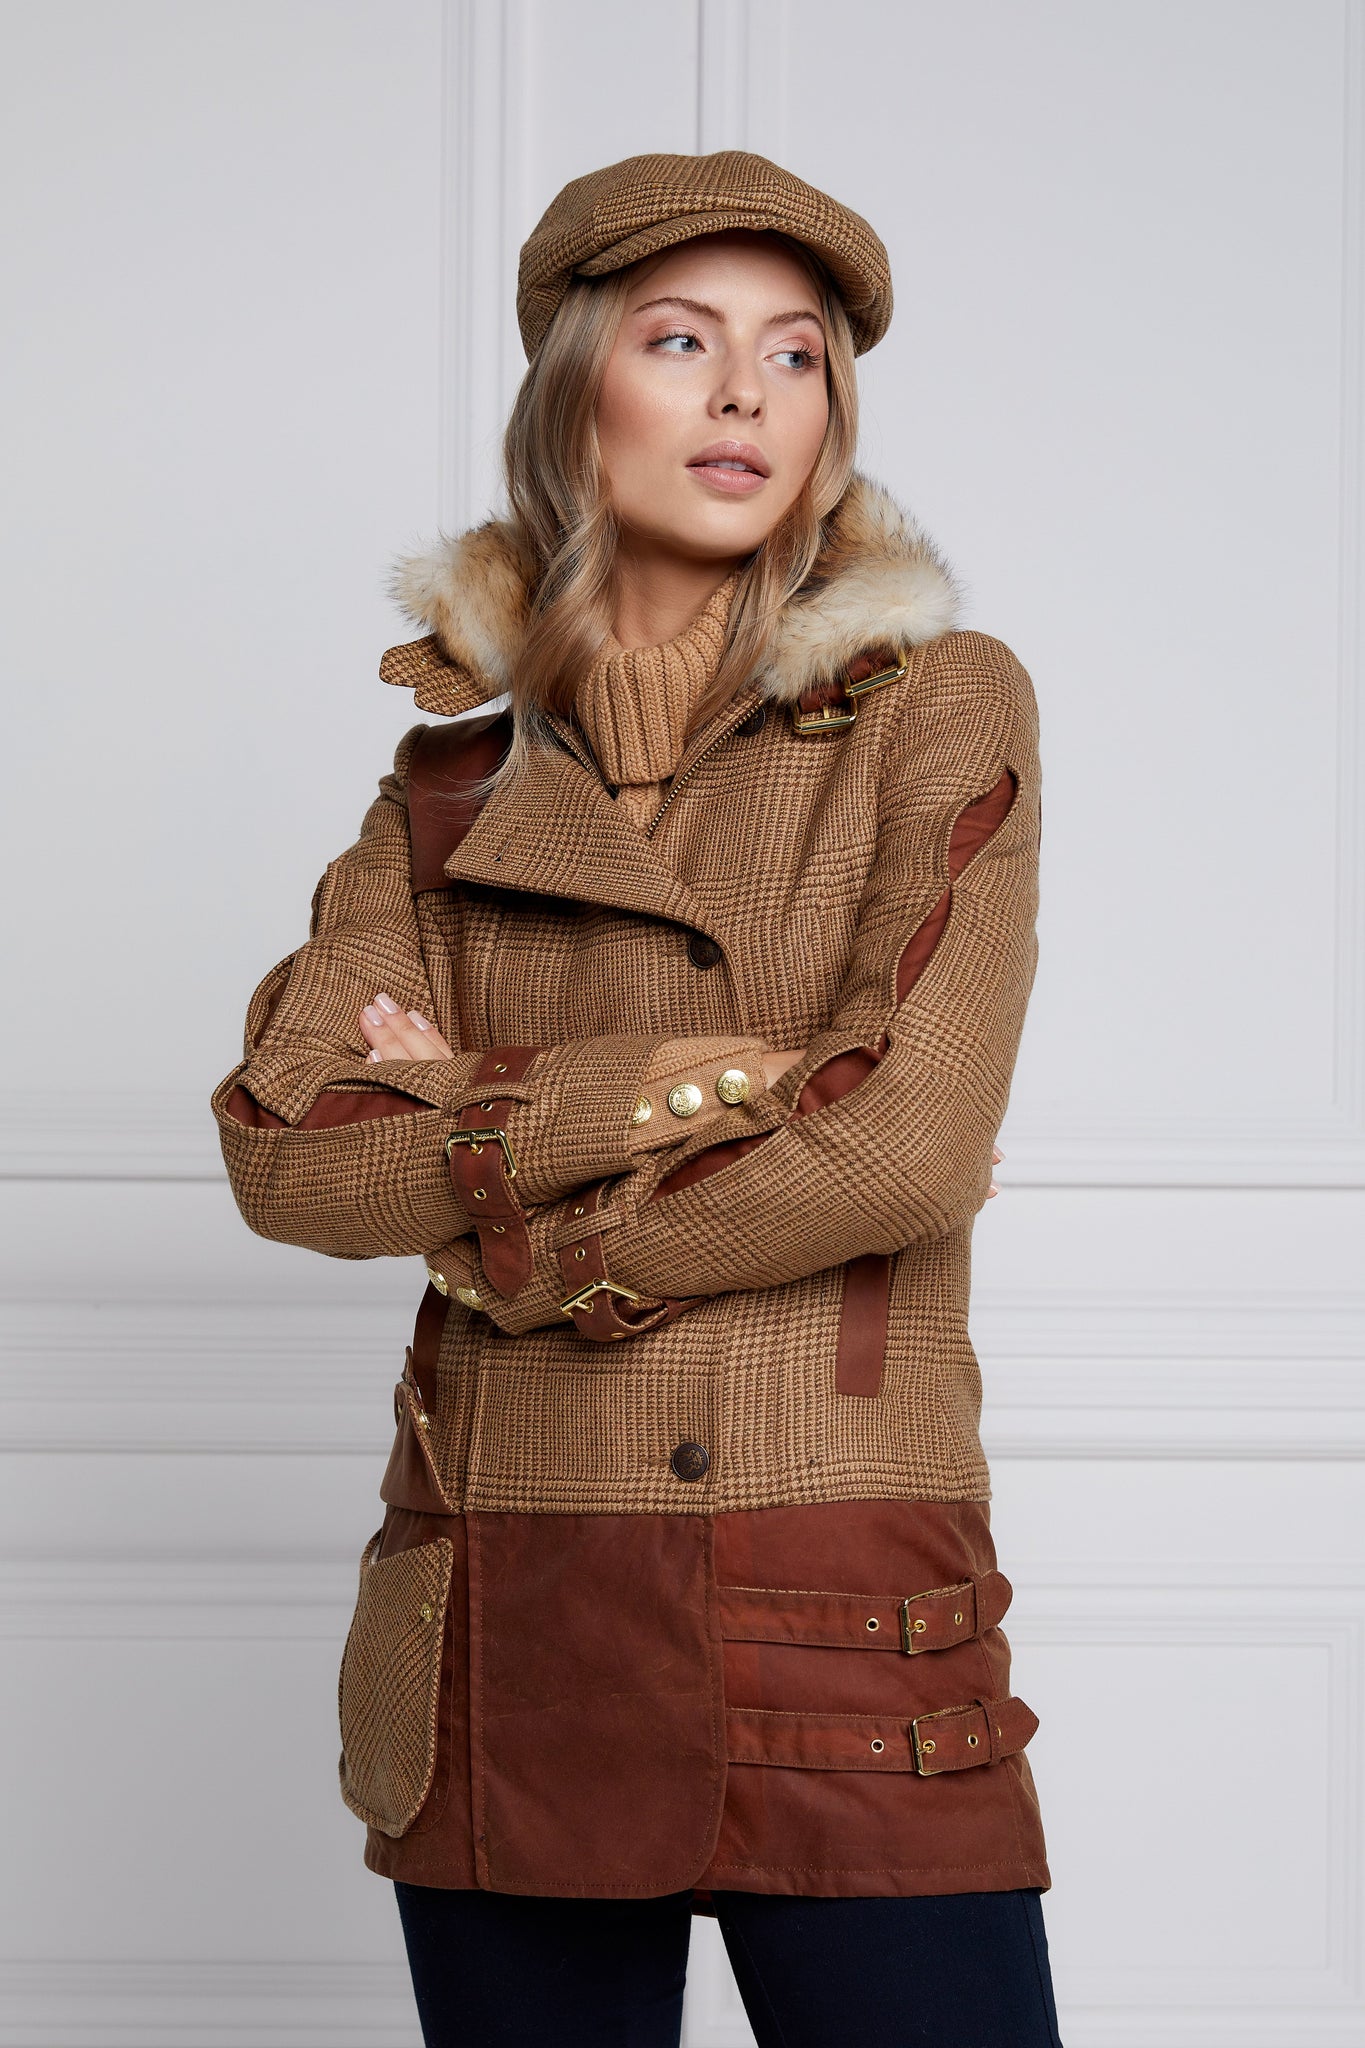 back of womens fitted field jacket in tawny and brown check tweed trimmed with contrast tan wax fabric on shoulder across back and on the hip with faux fur trim around the neck finished with horn button fastenings an buckles on the collar cuffs and hip